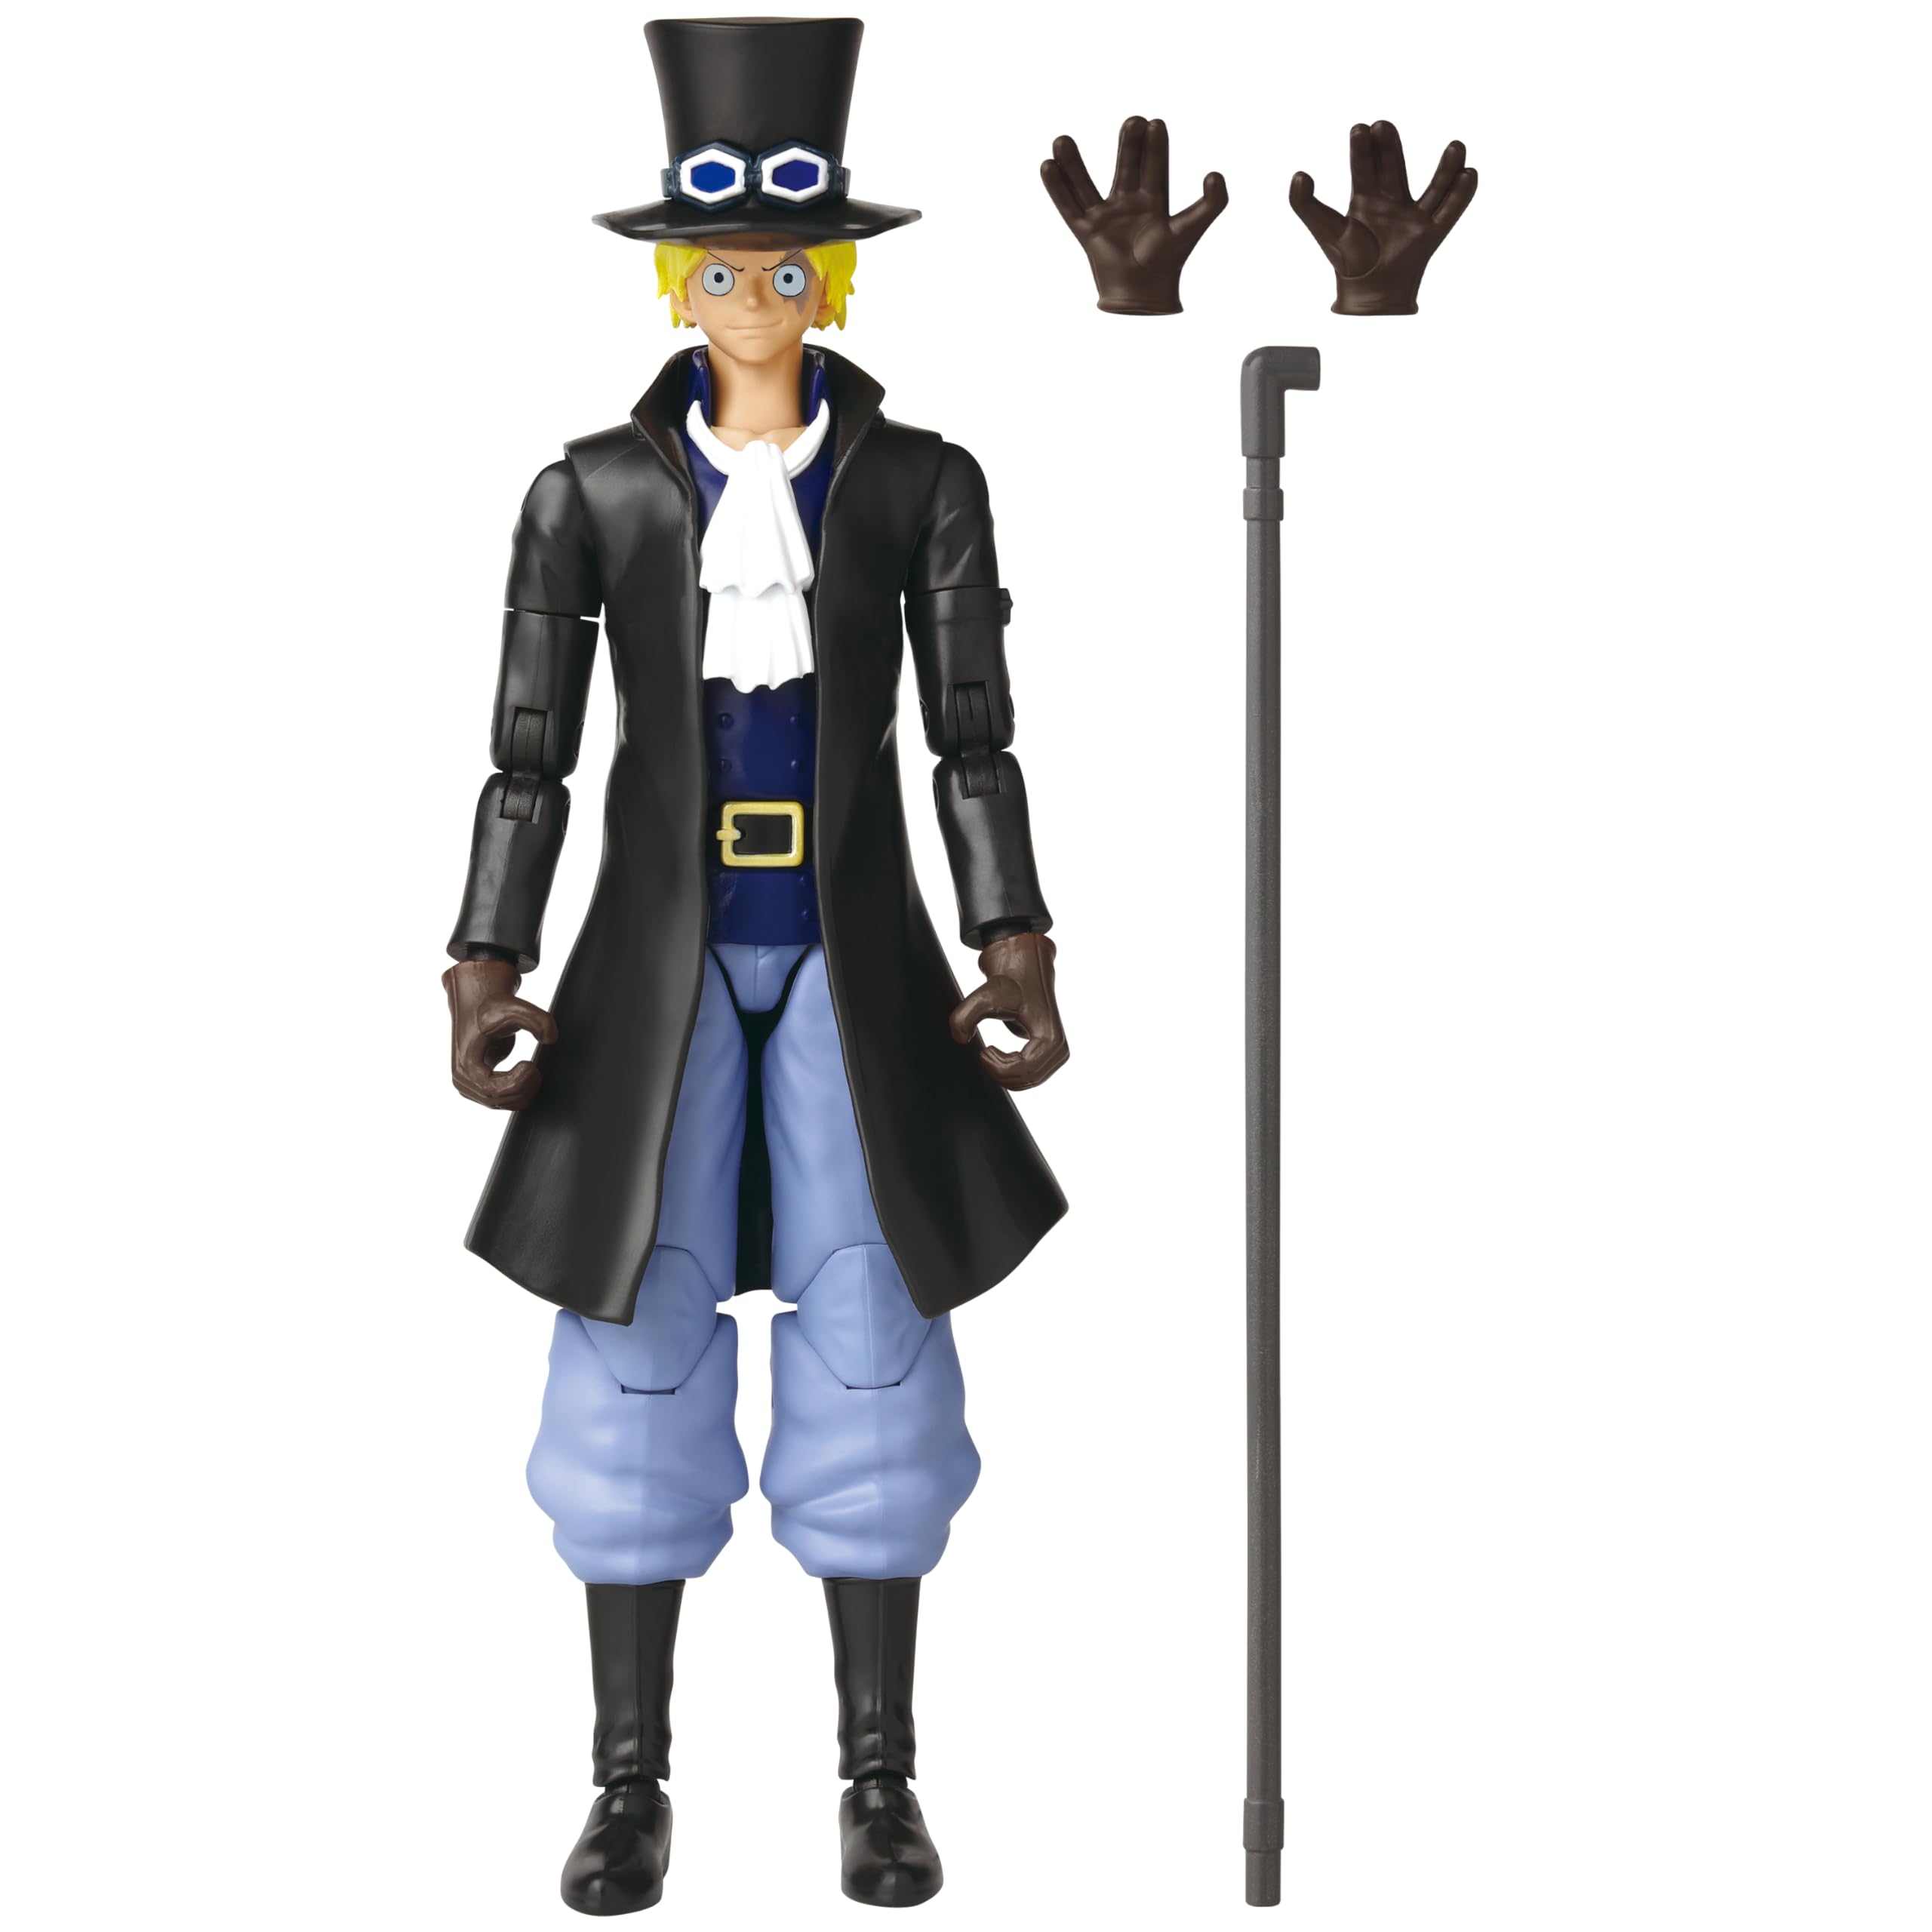 ANIME HEROES - One Piece - Sabo Action Figure